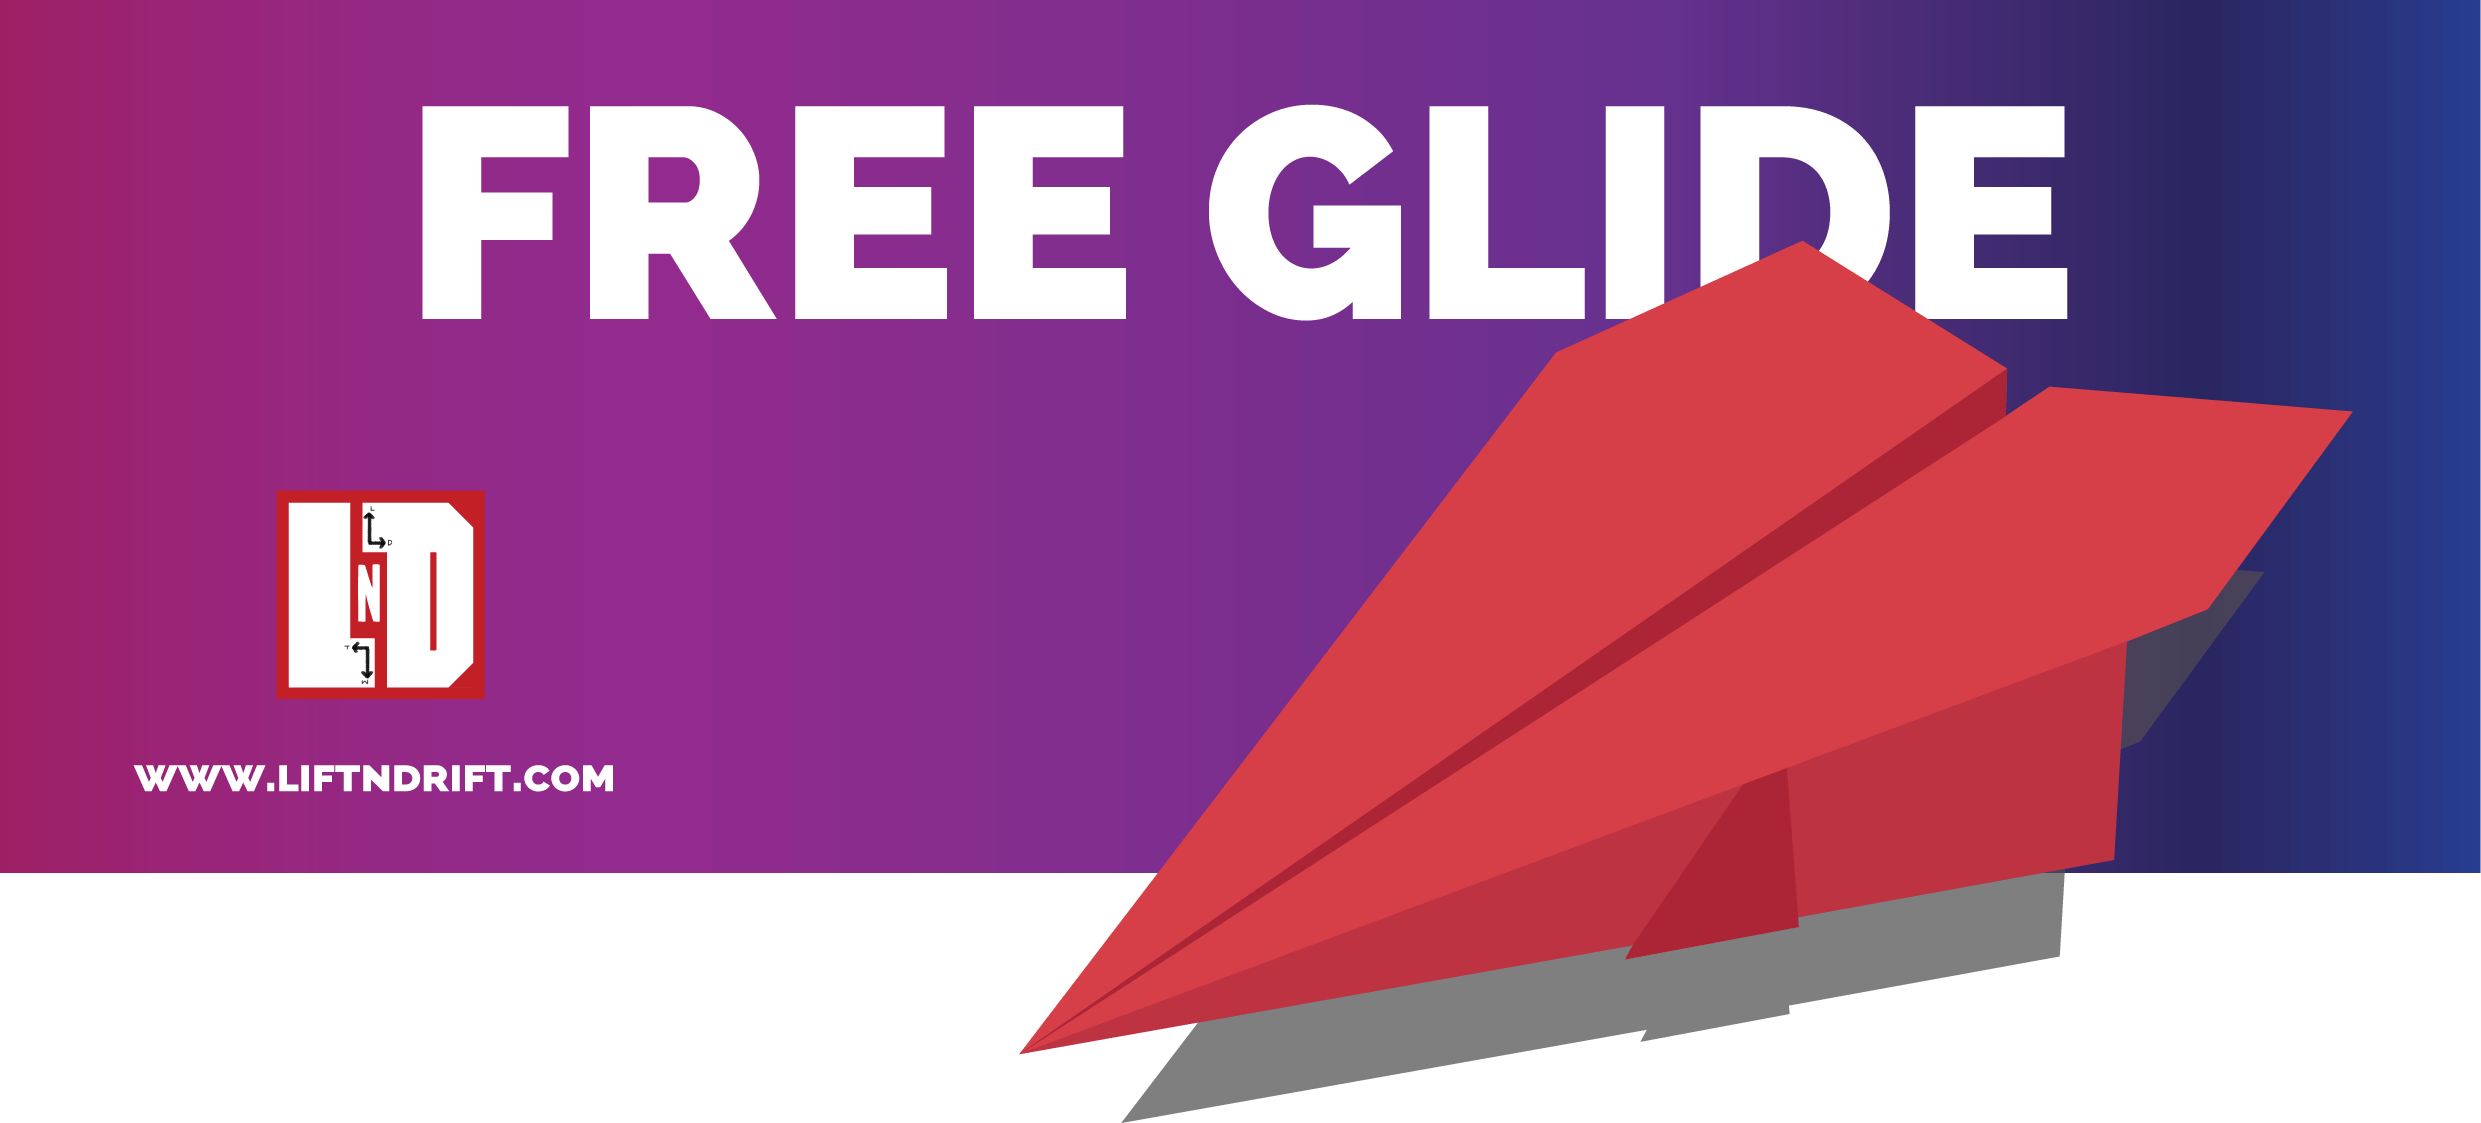 Free glide paper airplane